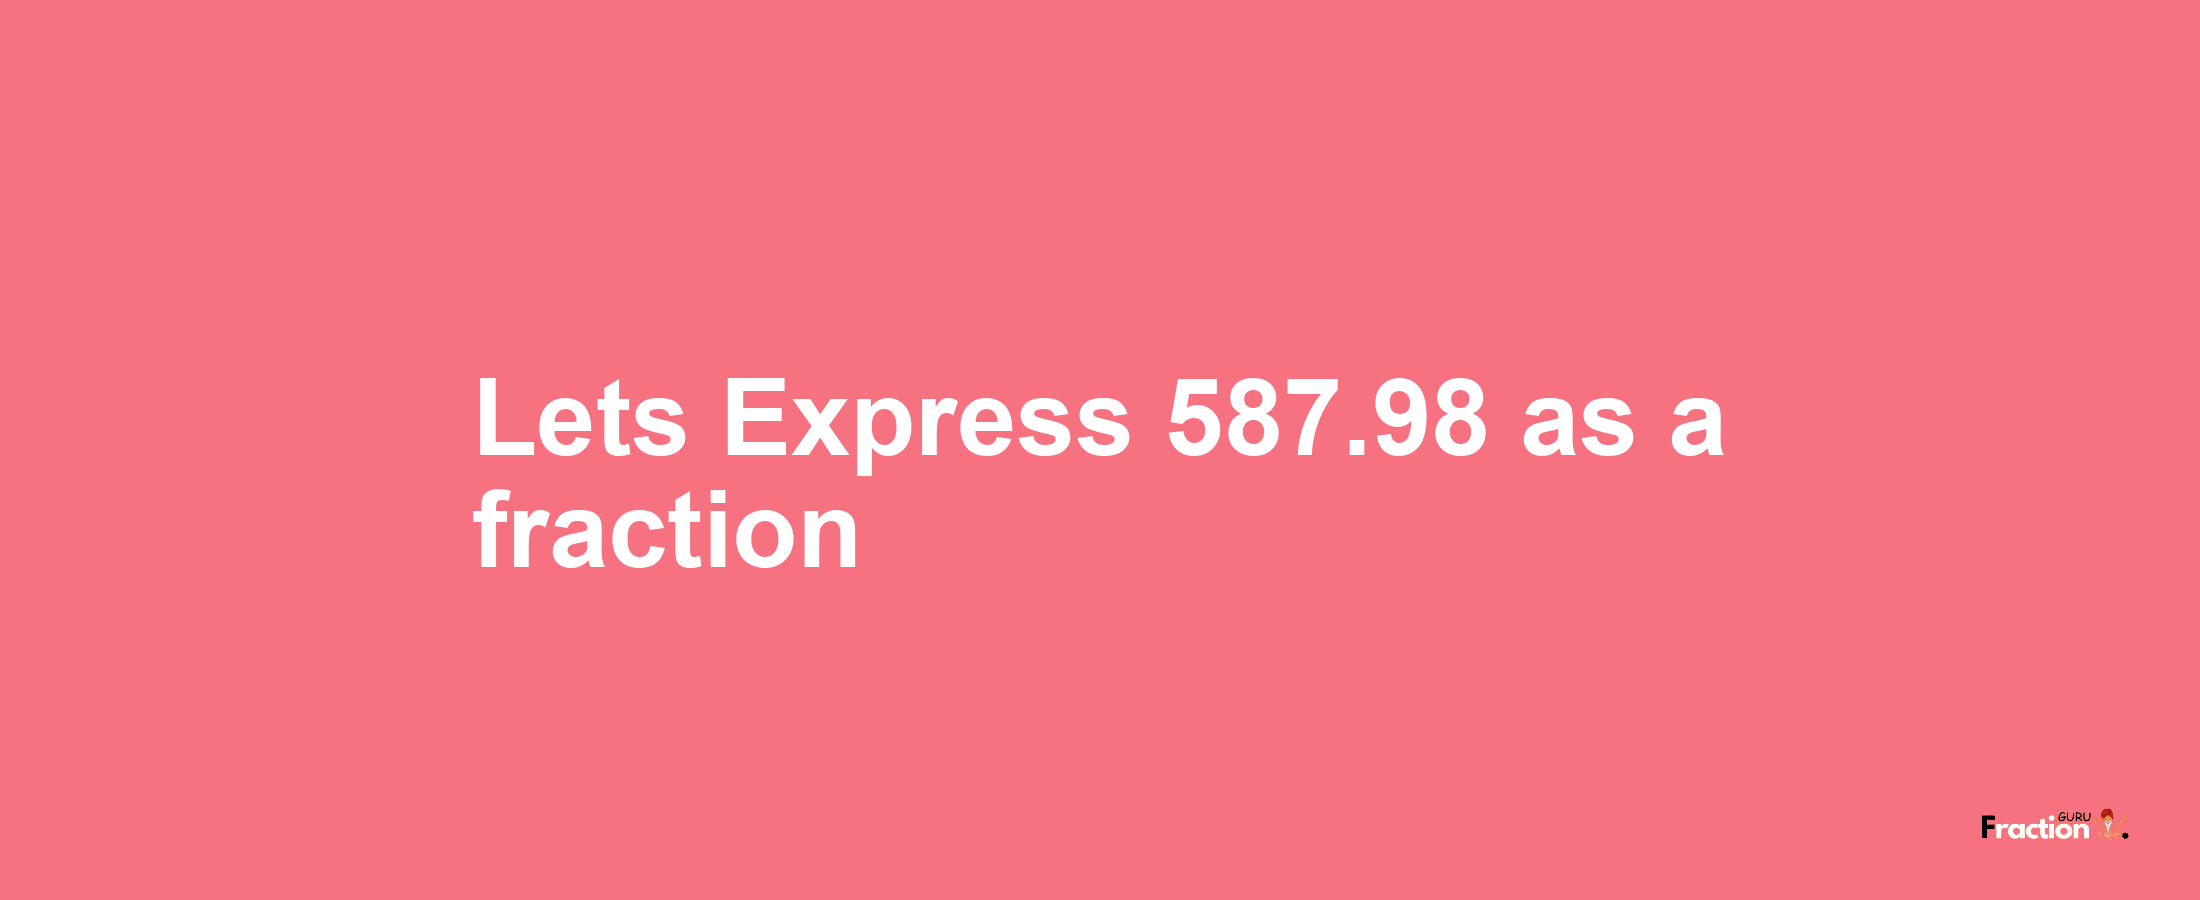 Lets Express 587.98 as afraction